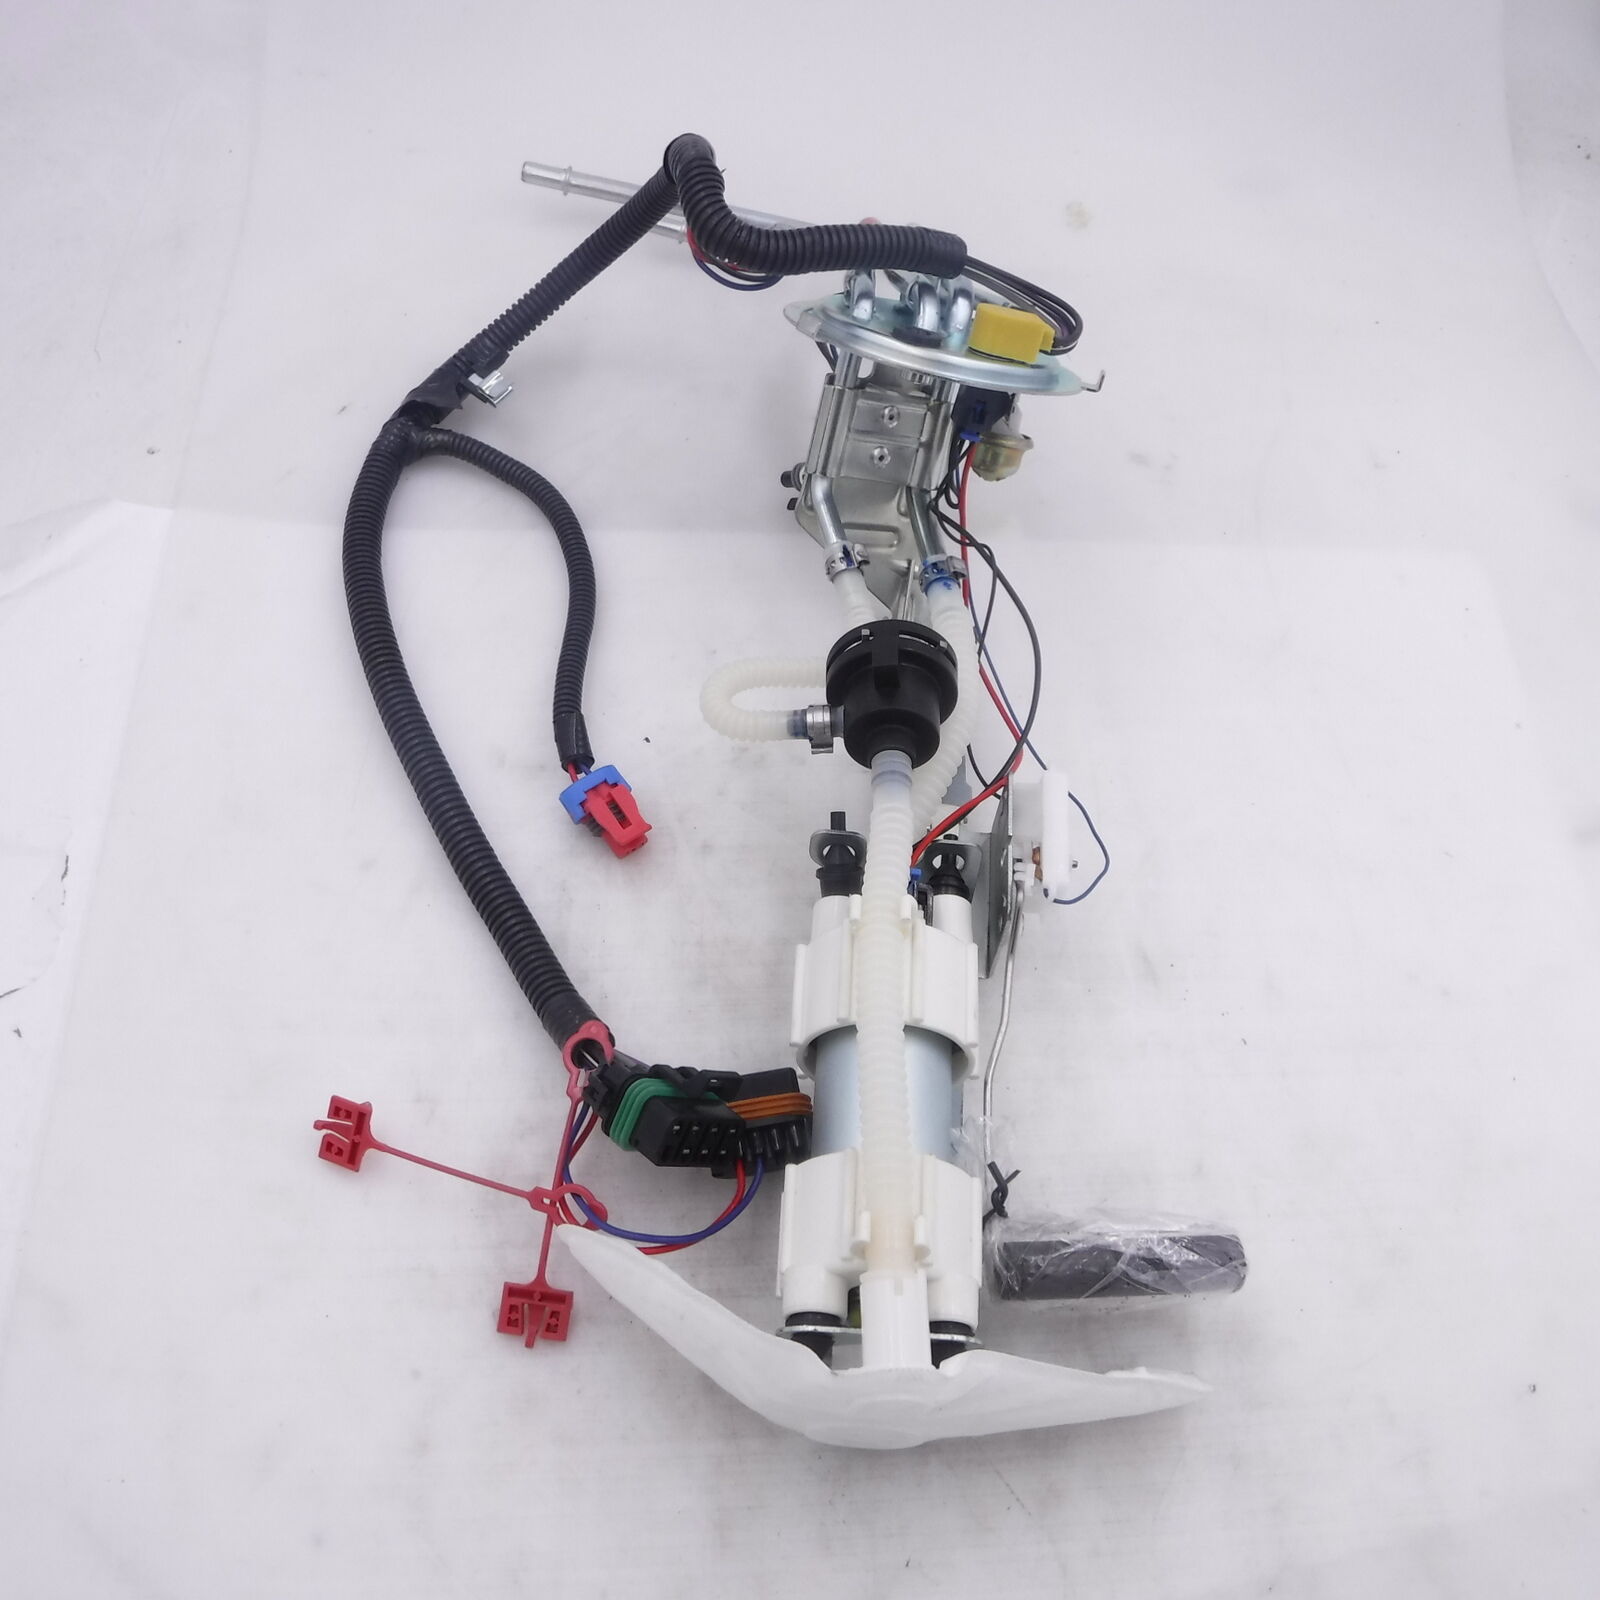 1998 LS1 F-Body Complete Fuel Pump Assembly W/RACETRONIX 255LPH Pump Installed (up to 600HP)